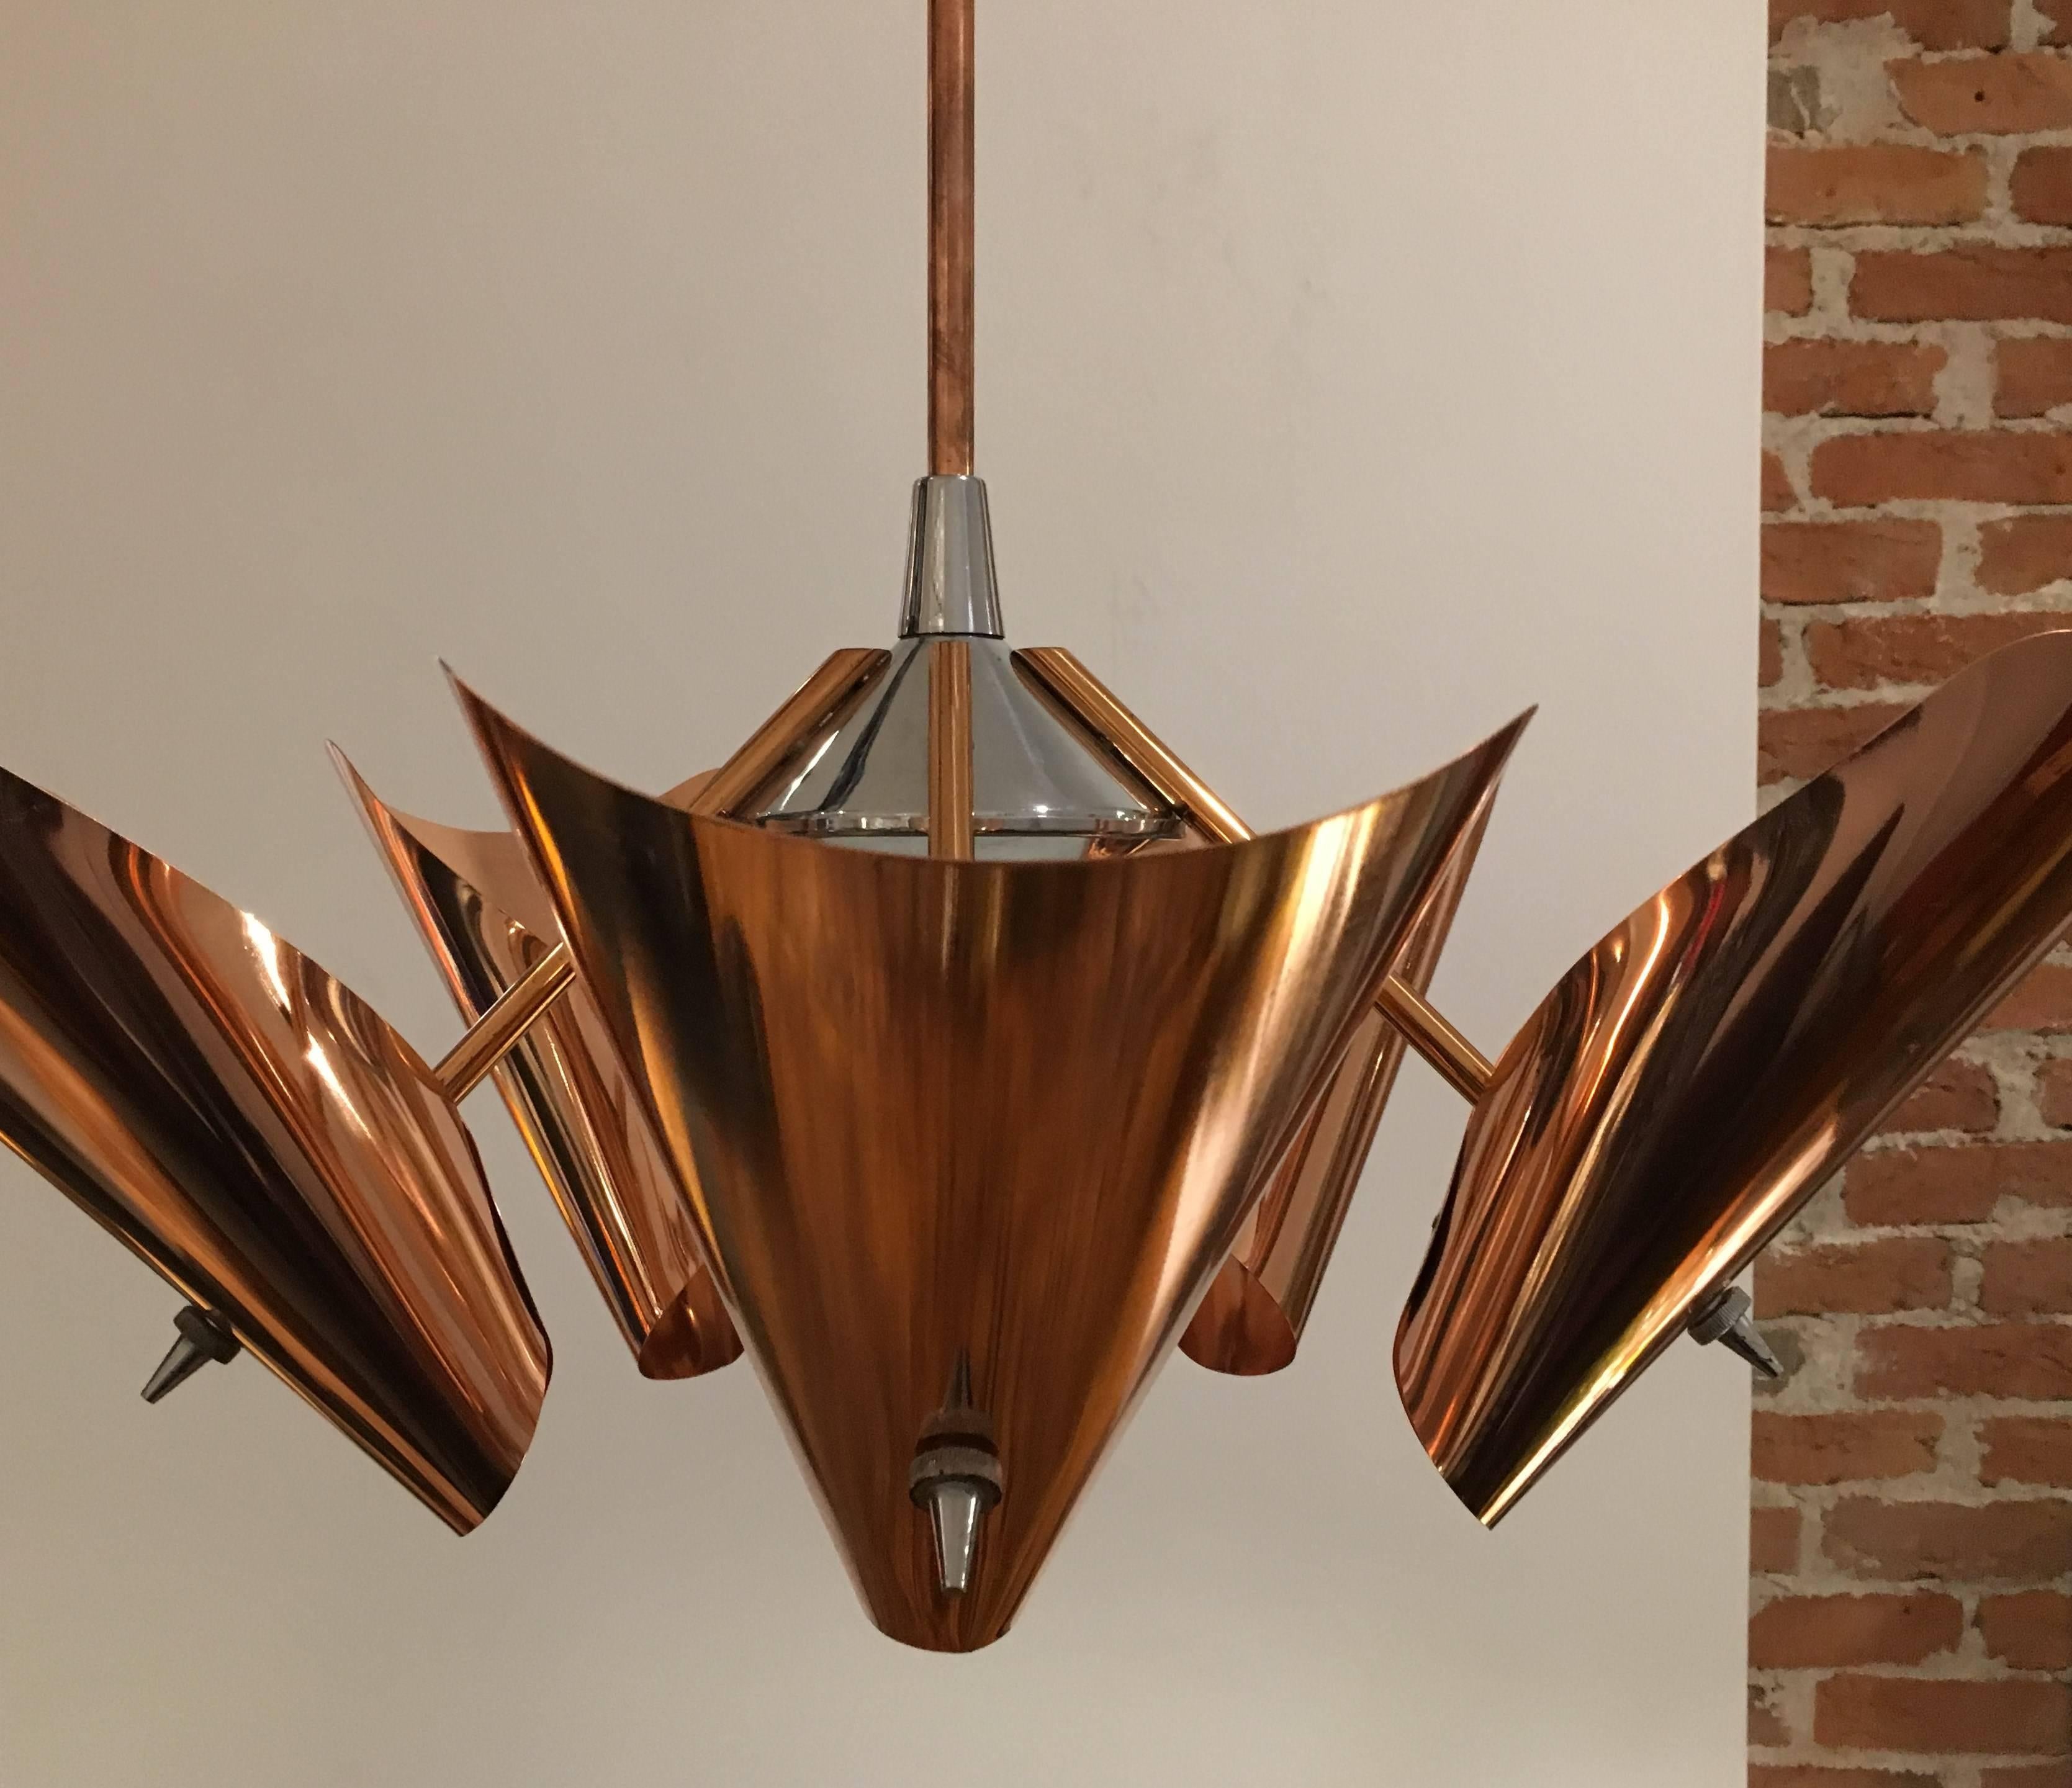 This five-armed chandelier made of copper and chrome-plated steel plate was produced in the Czech Republic in the 1960s by Drupol. 

We offer shop to door delivery worldwide. Please ask for a quote.